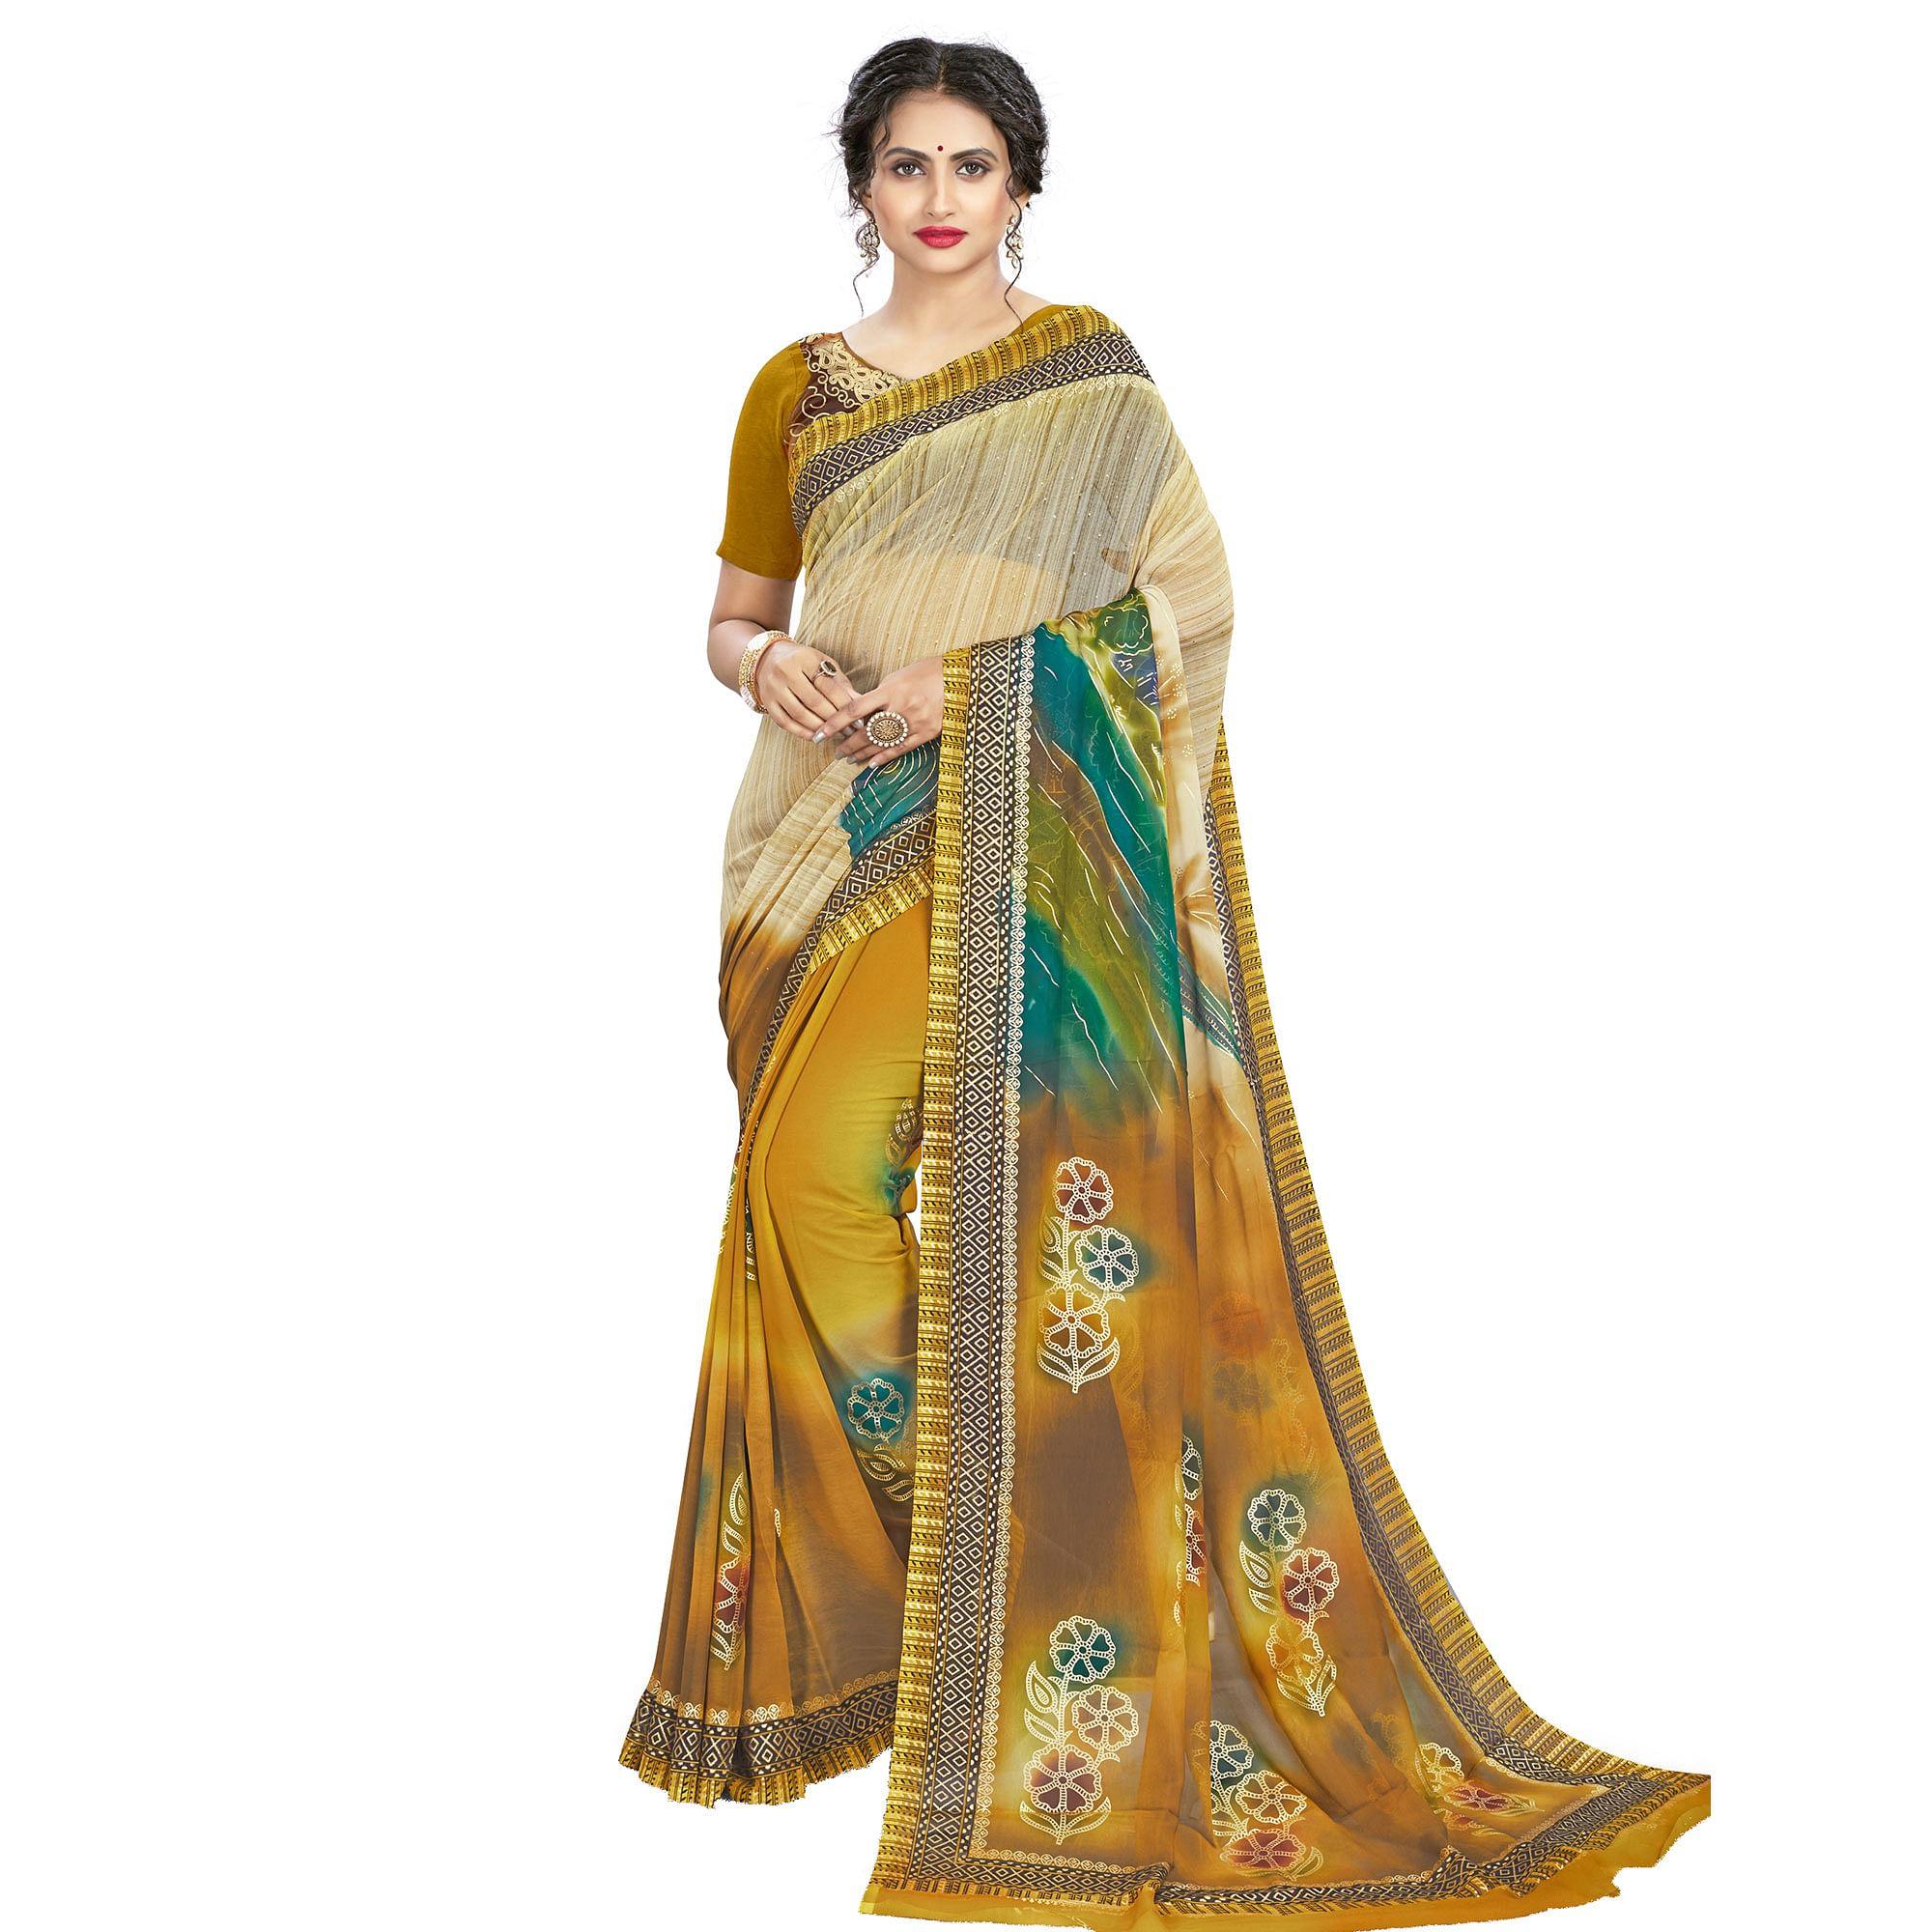 Sophisticated Beige - Mustard Colored Casual Wear Printed Georgette Saree - Peachmode